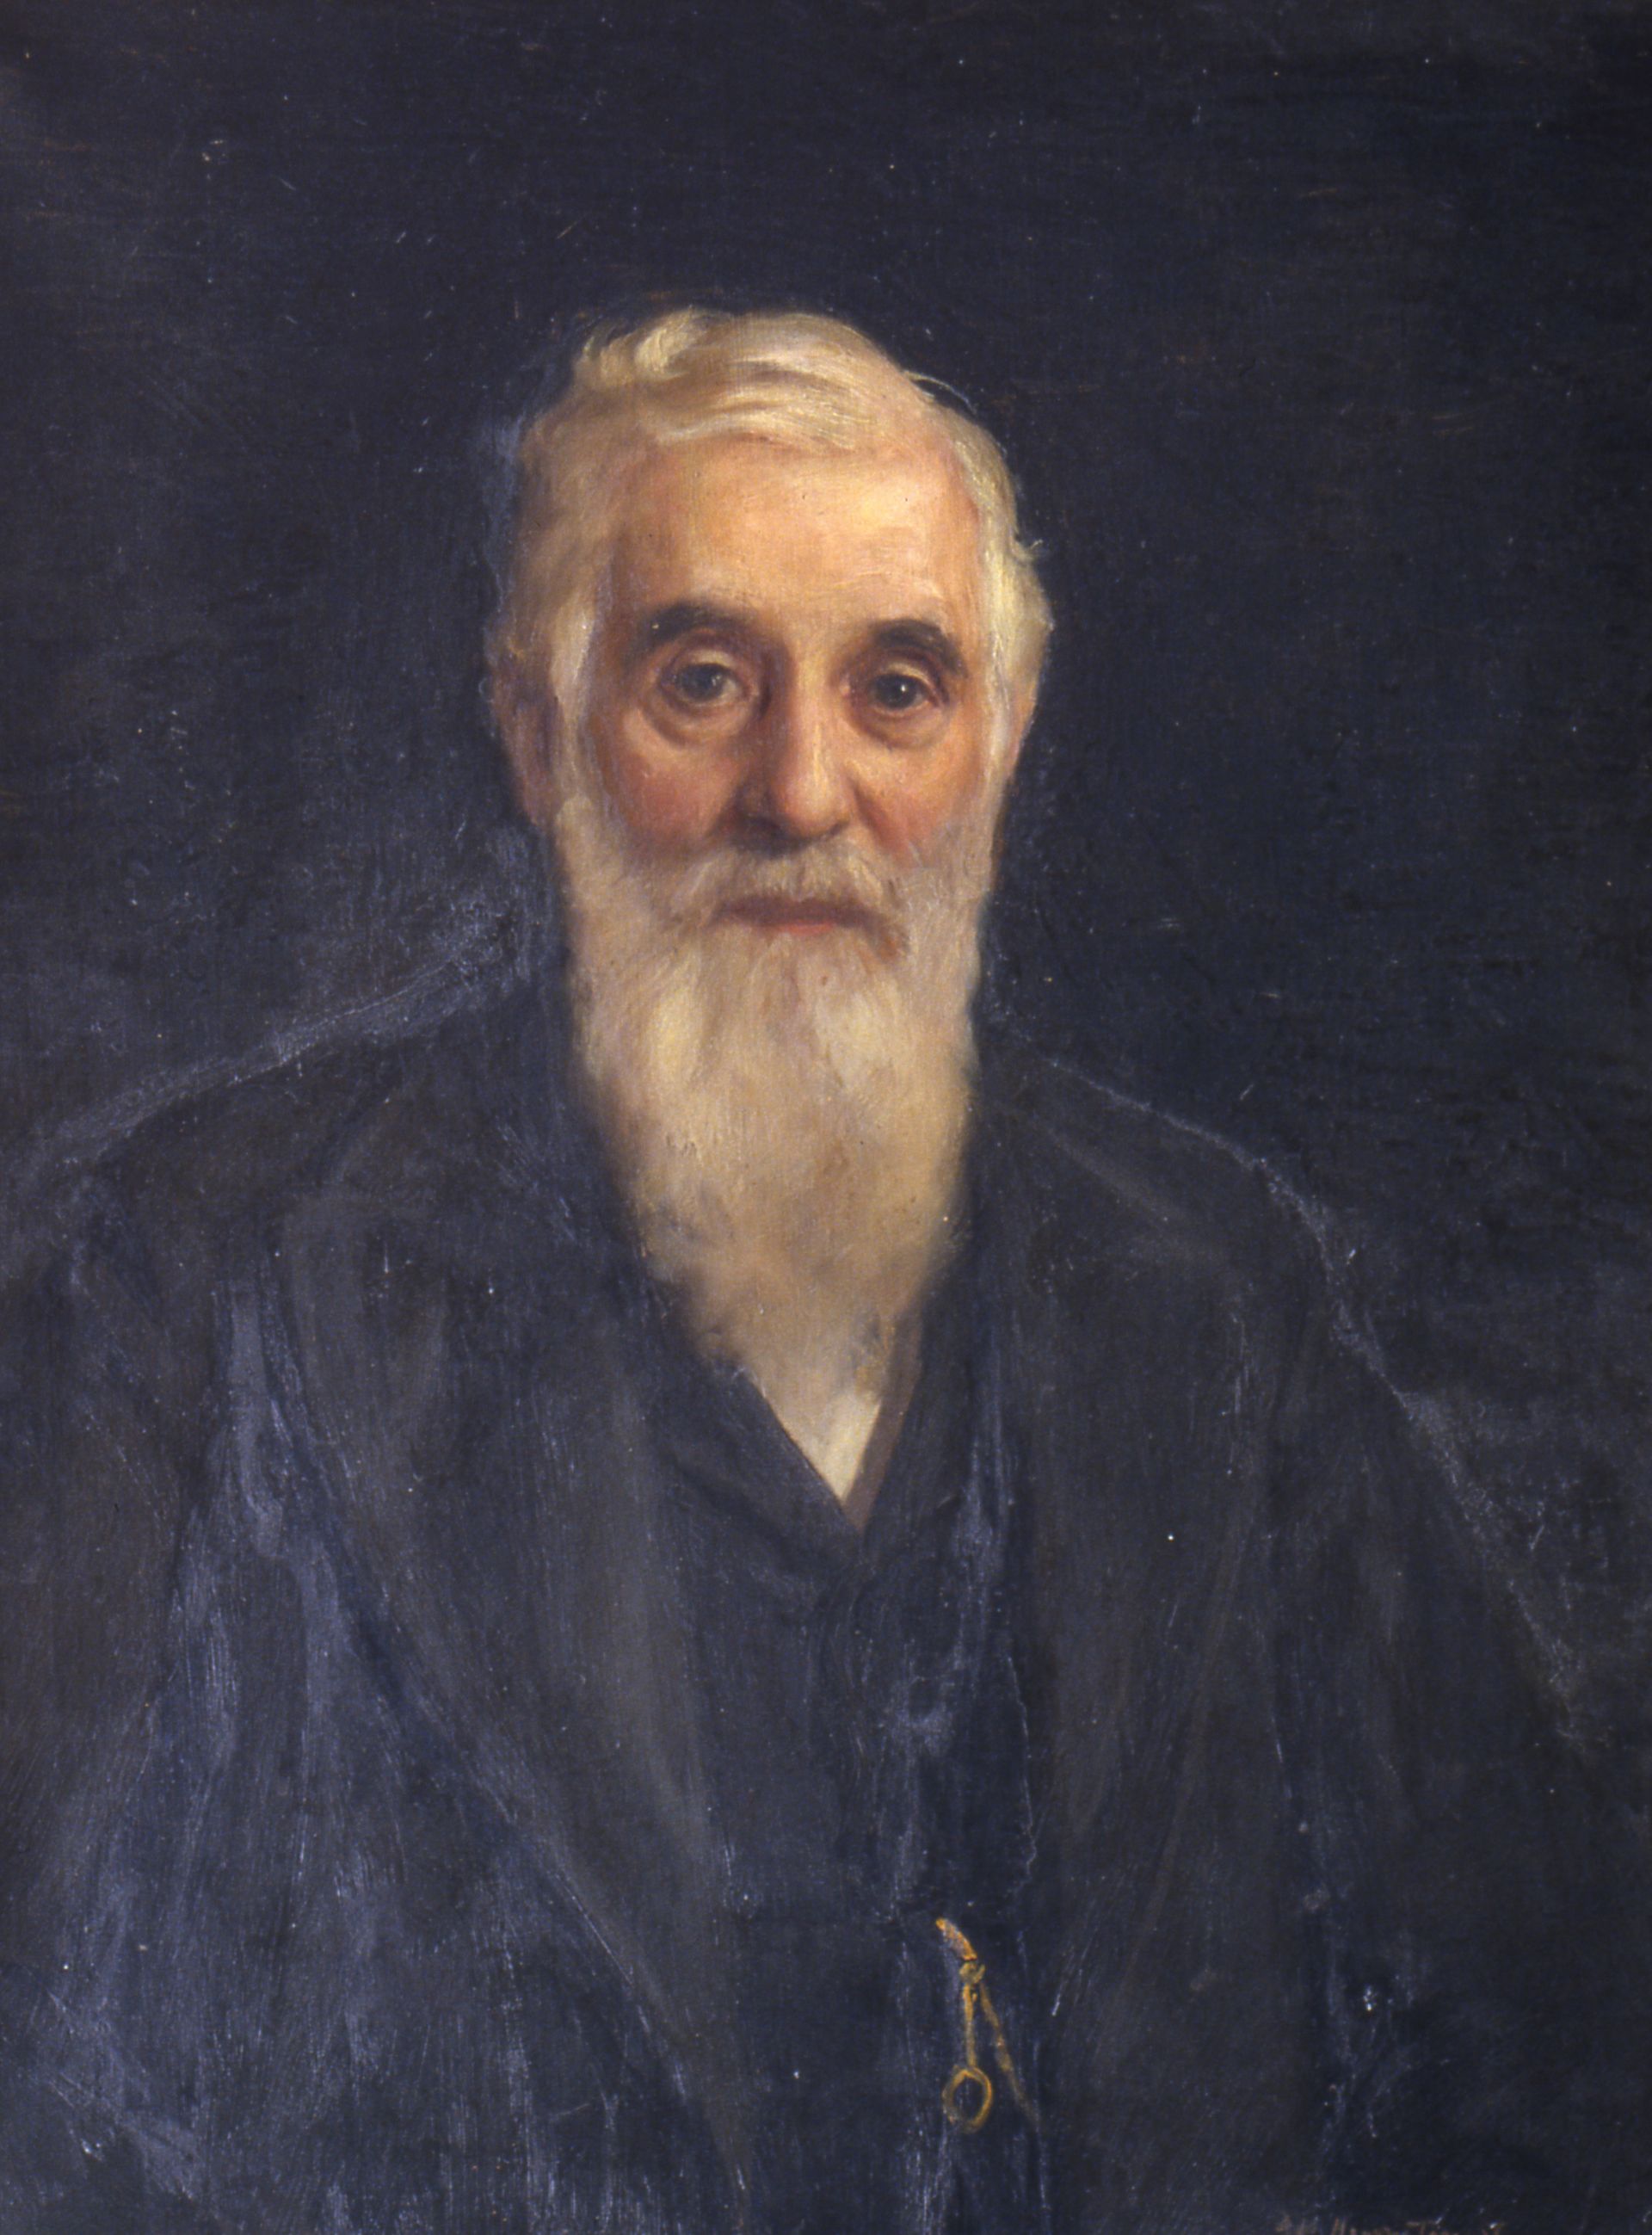 A painting of the prophet Lorenzo Snow with a beard, wearing a black suit and a watch chain.